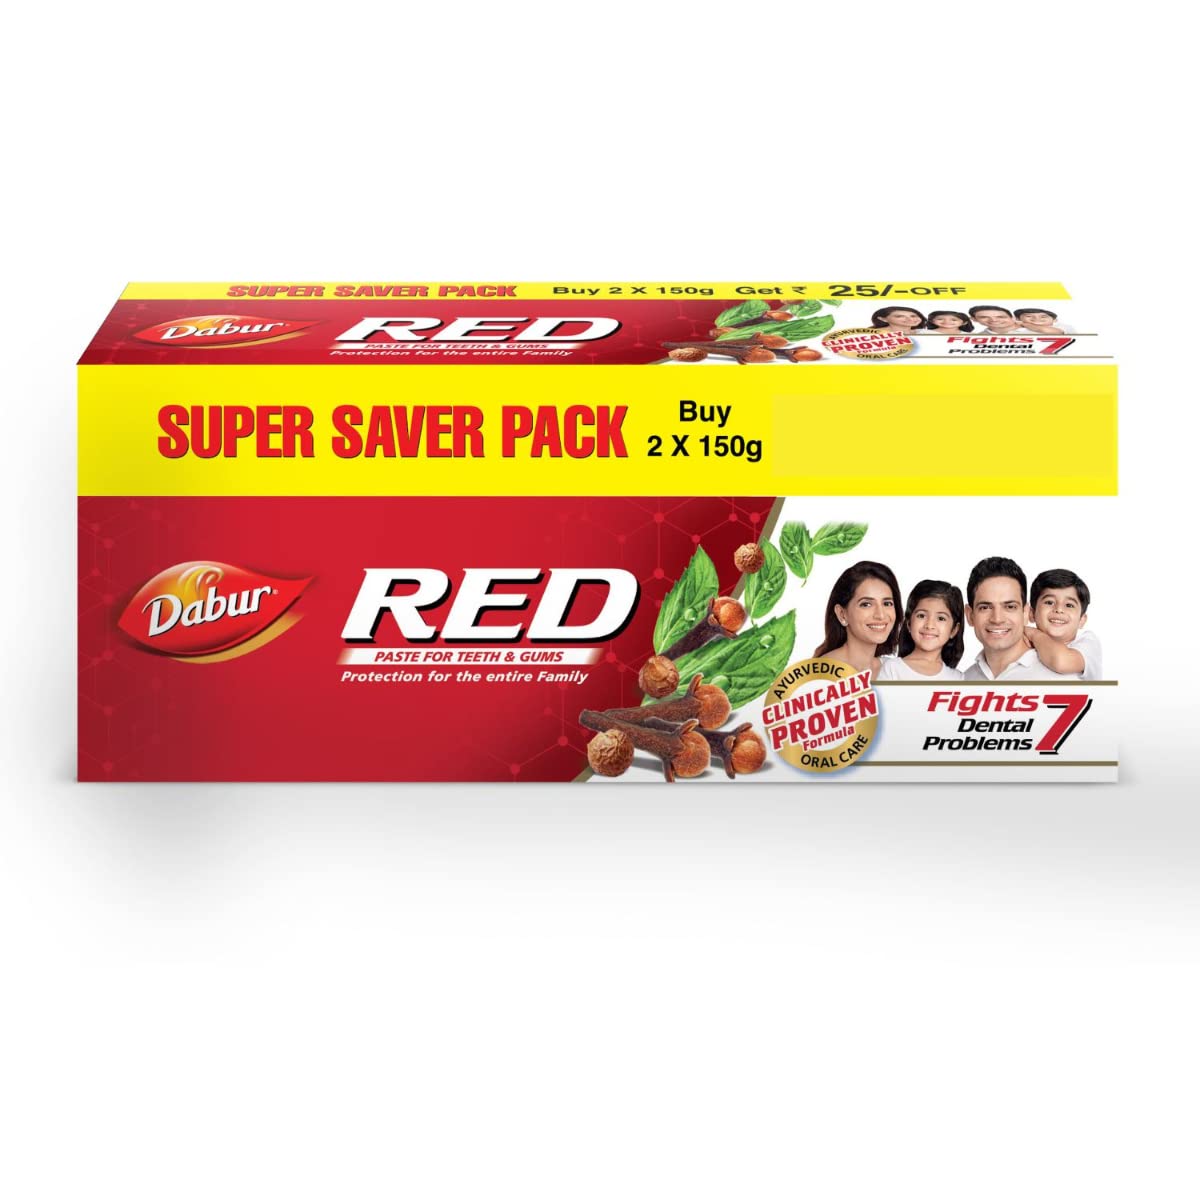 Dabur Red Toothpaste, Super Saver Pack, World's No.1 Ayurvedic Paste, Provides Germ Protection, Cavity Protection, Plaque Removal, 300G(Savers Retail)